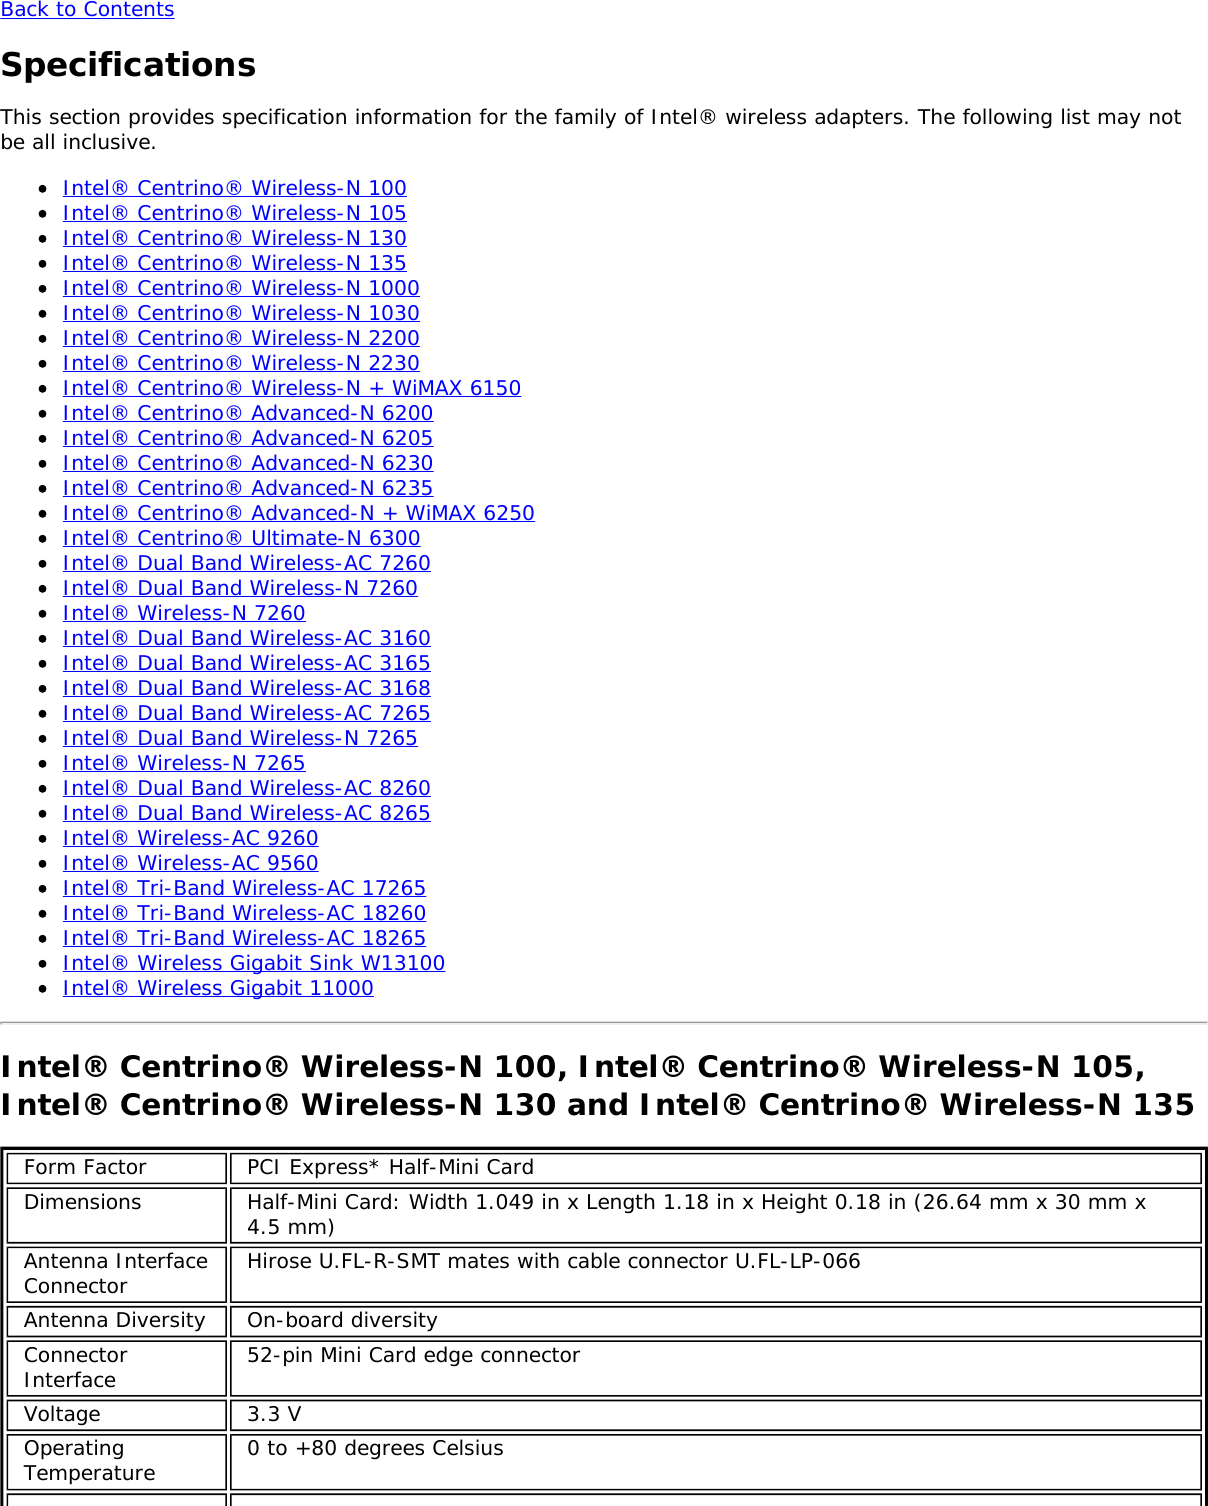 Back to ContentsSpecificationsThis section provides specification information for the family of Intel® wireless adapters. The following list may notbe all inclusive.Intel® Centrino® Wireless-N 100Intel® Centrino® Wireless-N 105Intel® Centrino® Wireless-N 130Intel® Centrino® Wireless-N 135Intel® Centrino® Wireless-N 1000Intel® Centrino® Wireless-N 1030Intel® Centrino® Wireless-N 2200Intel® Centrino® Wireless-N 2230Intel® Centrino® Wireless-N + WiMAX 6150Intel® Centrino® Advanced-N 6200Intel® Centrino® Advanced-N 6205Intel® Centrino® Advanced-N 6230Intel® Centrino® Advanced-N 6235Intel® Centrino® Advanced-N + WiMAX 6250Intel® Centrino® Ultimate-N 6300Intel® Dual Band Wireless-AC 7260Intel® Dual Band Wireless-N 7260Intel® Wireless-N 7260Intel® Dual Band Wireless-AC 3160Intel® Dual Band Wireless-AC 3165Intel® Dual Band Wireless-AC 3168Intel® Dual Band Wireless-AC 7265Intel® Dual Band Wireless-N 7265Intel® Wireless-N 7265Intel® Dual Band Wireless-AC 8260Intel® Dual Band Wireless-AC 8265Intel® Wireless-AC 9260Intel® Wireless-AC 9560Intel® Tri-Band Wireless-AC 17265Intel® Tri-Band Wireless-AC 18260Intel® Tri-Band Wireless-AC 18265Intel® Wireless Gigabit Sink W13100Intel® Wireless Gigabit 11000Intel® Centrino® Wireless-N 100, Intel® Centrino® Wireless-N 105,Intel® Centrino® Wireless-N 130 and Intel® Centrino® Wireless-N 135Form Factor PCI Express* Half-Mini CardDimensions Half-Mini Card: Width 1.049 in x Length 1.18 in x Height 0.18 in (26.64 mm x 30 mm x4.5 mm)Antenna InterfaceConnector Hirose U.FL-R-SMT mates with cable connector U.FL-LP-066Antenna Diversity On-board diversityConnectorInterface 52-pin Mini Card edge connectorVoltage 3.3 VOperatingTemperature 0 to +80 degrees Celsius